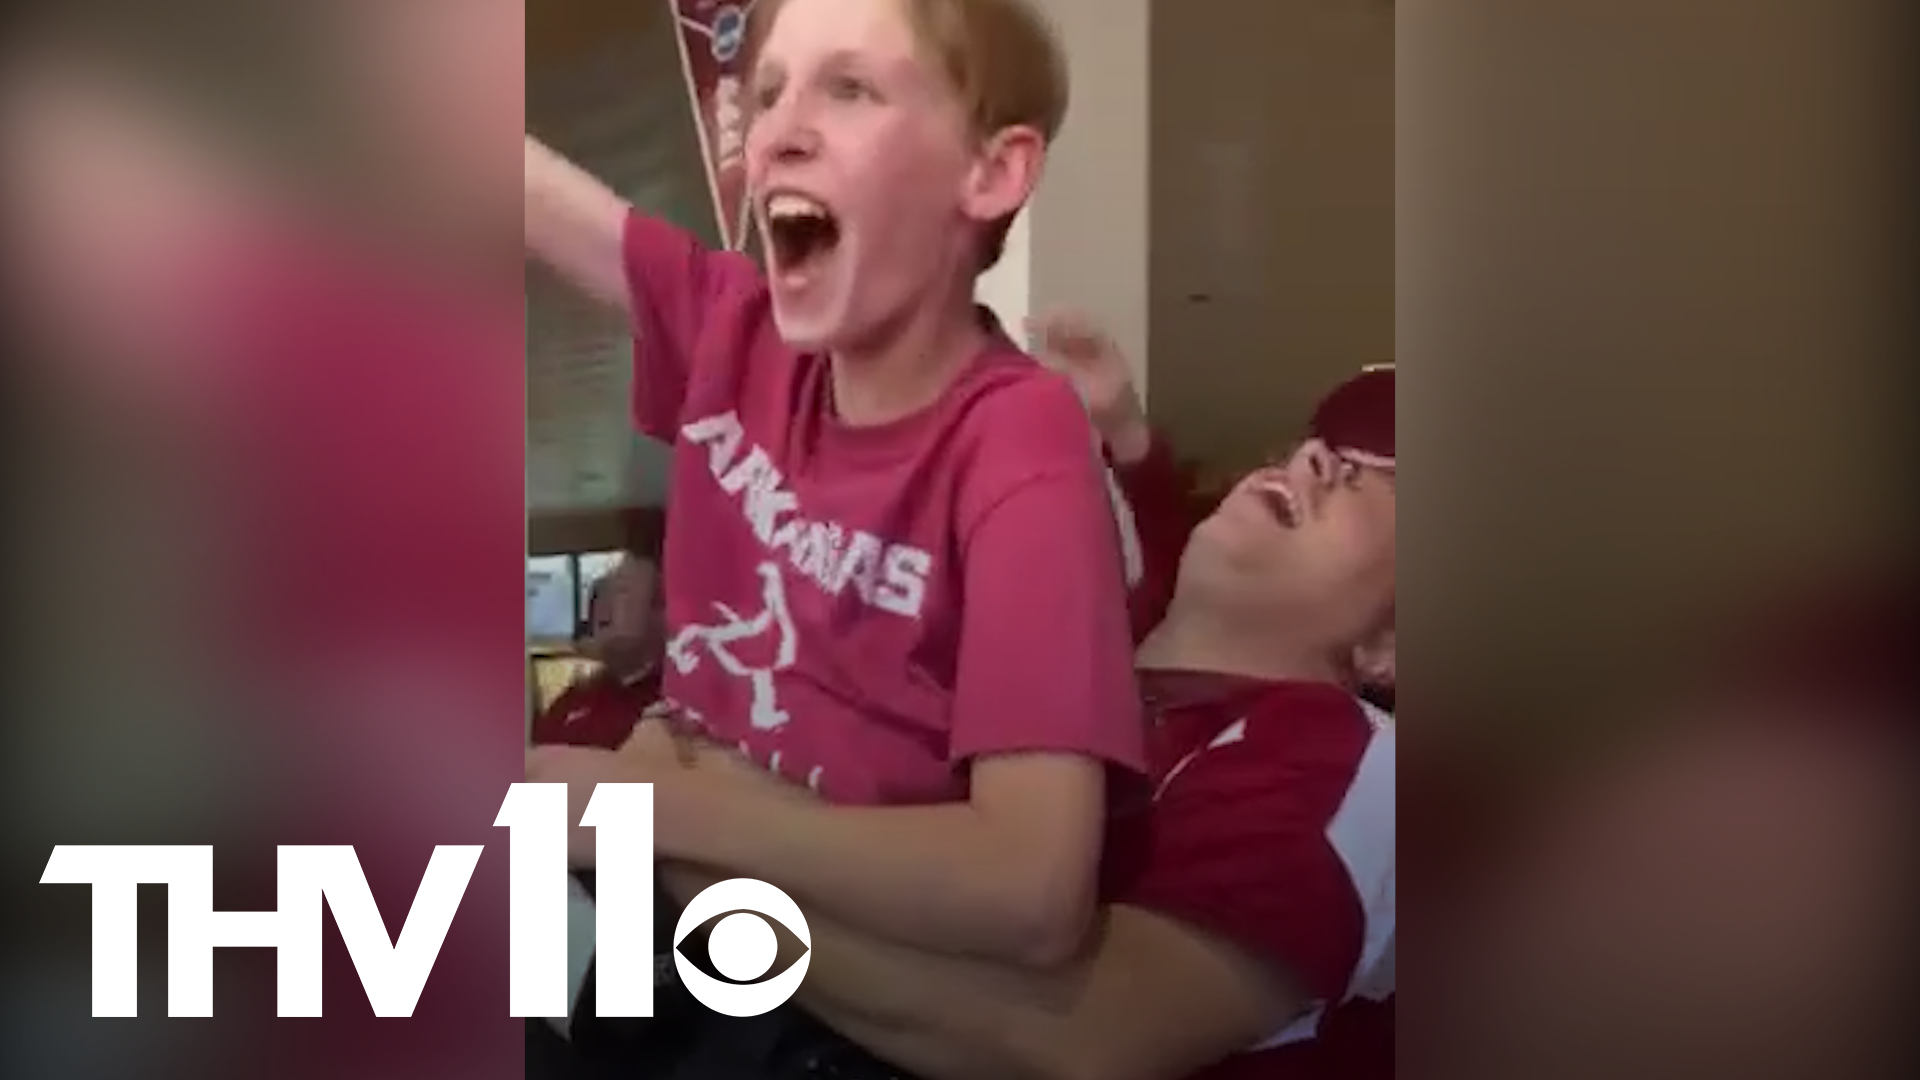 Hunter Moats was surprised with last minute Razorback tickets for his 13th birthday, giving him a chance to attend a life-changing baseball game.